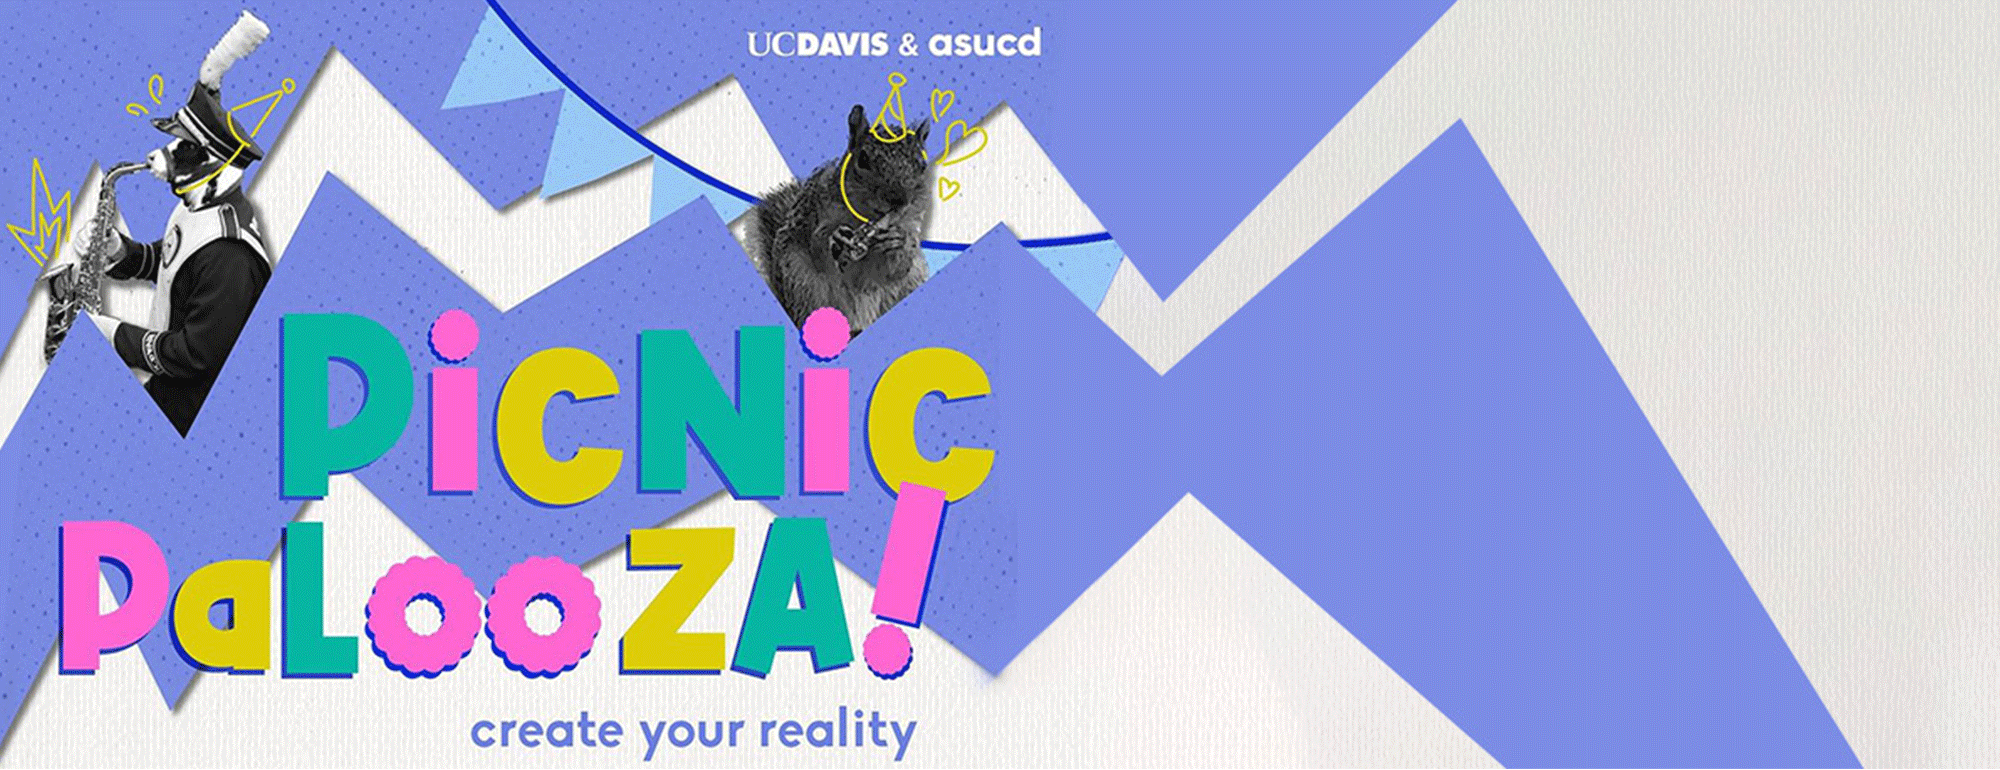 "Picnic Palooza" header image with retro block shapes, a cow and a squirrel.